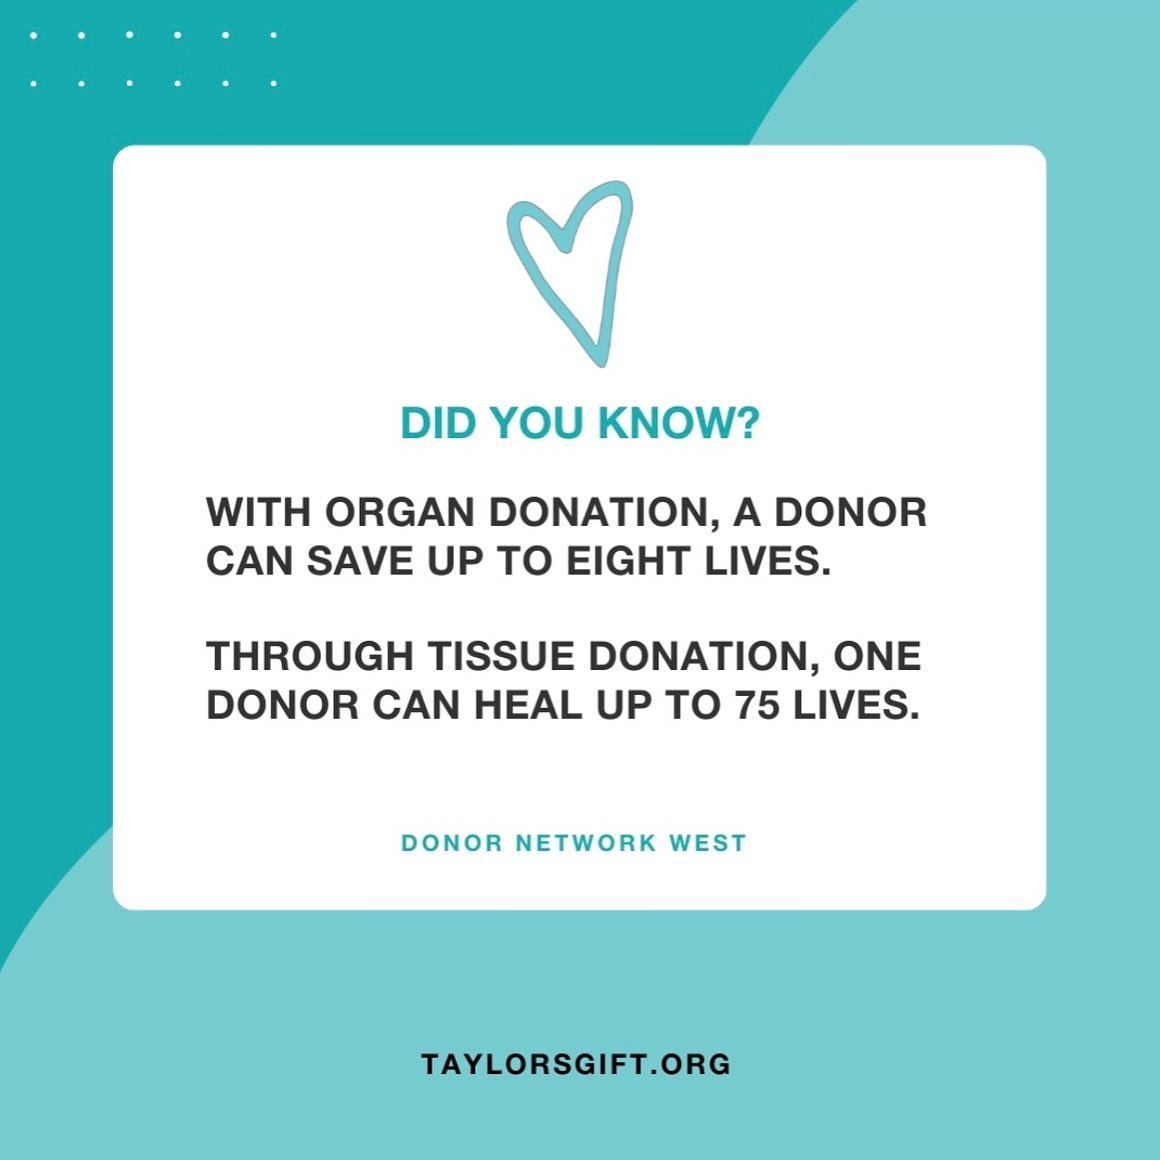 Impressive facts about what ONE EXTRAORDINARY life can do through organ donation. 💙Are you a registered organ donor? ​​​​​​​​​

⬇️⬇️⬇️
https://registerme.org